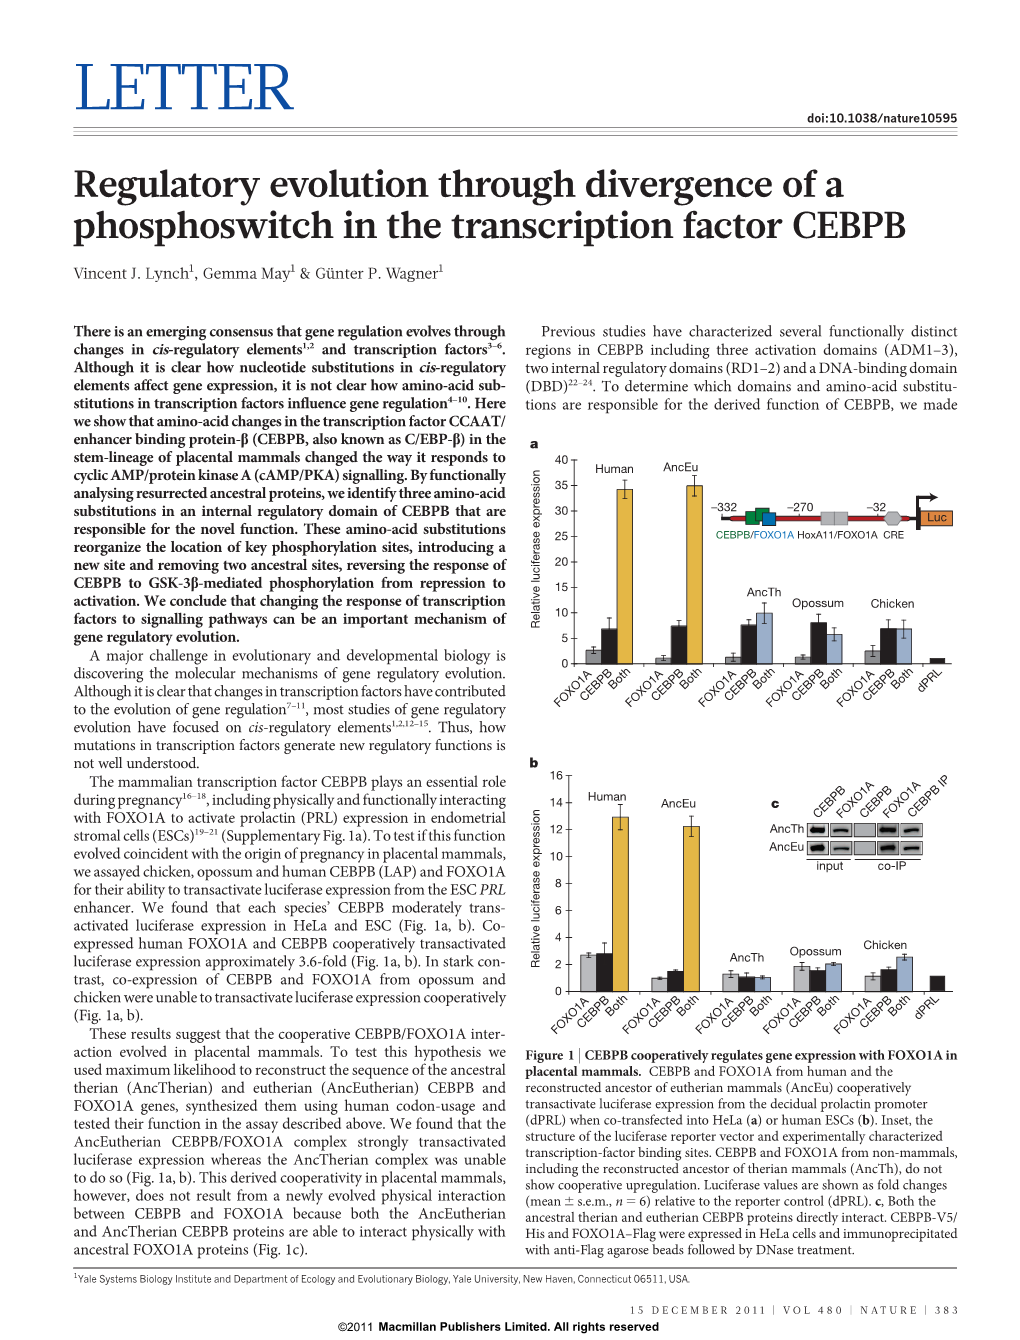 Regulatory Evolution Through Divergence of a Phosphoswitch in the Transcription Factor CEBPB